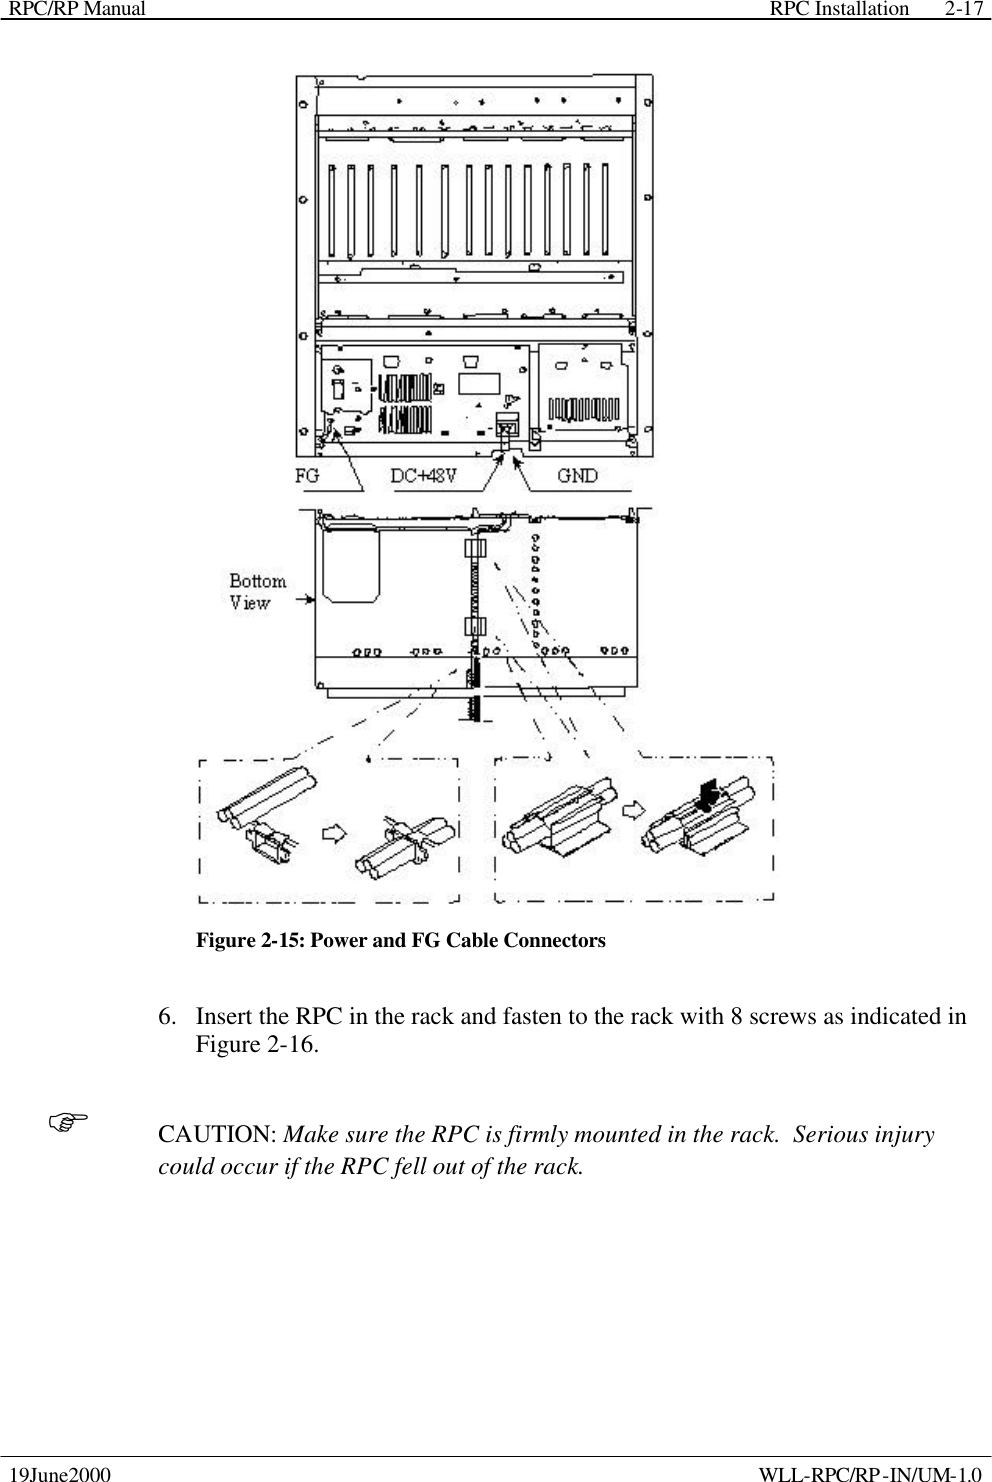 RPC/RP Manual    RPC Installation  19June2000    WLL-RPC/RP-IN/UM-1.0 2-17 Figure 2-15: Power and FG Cable Connectors 6.  Insert the RPC in the rack and fasten to the rack with 8 screws as indicated in Figure 2-16. F CAUTION: Make sure the RPC is firmly mounted in the rack.  Serious injury could occur if the RPC fell out of the rack. 